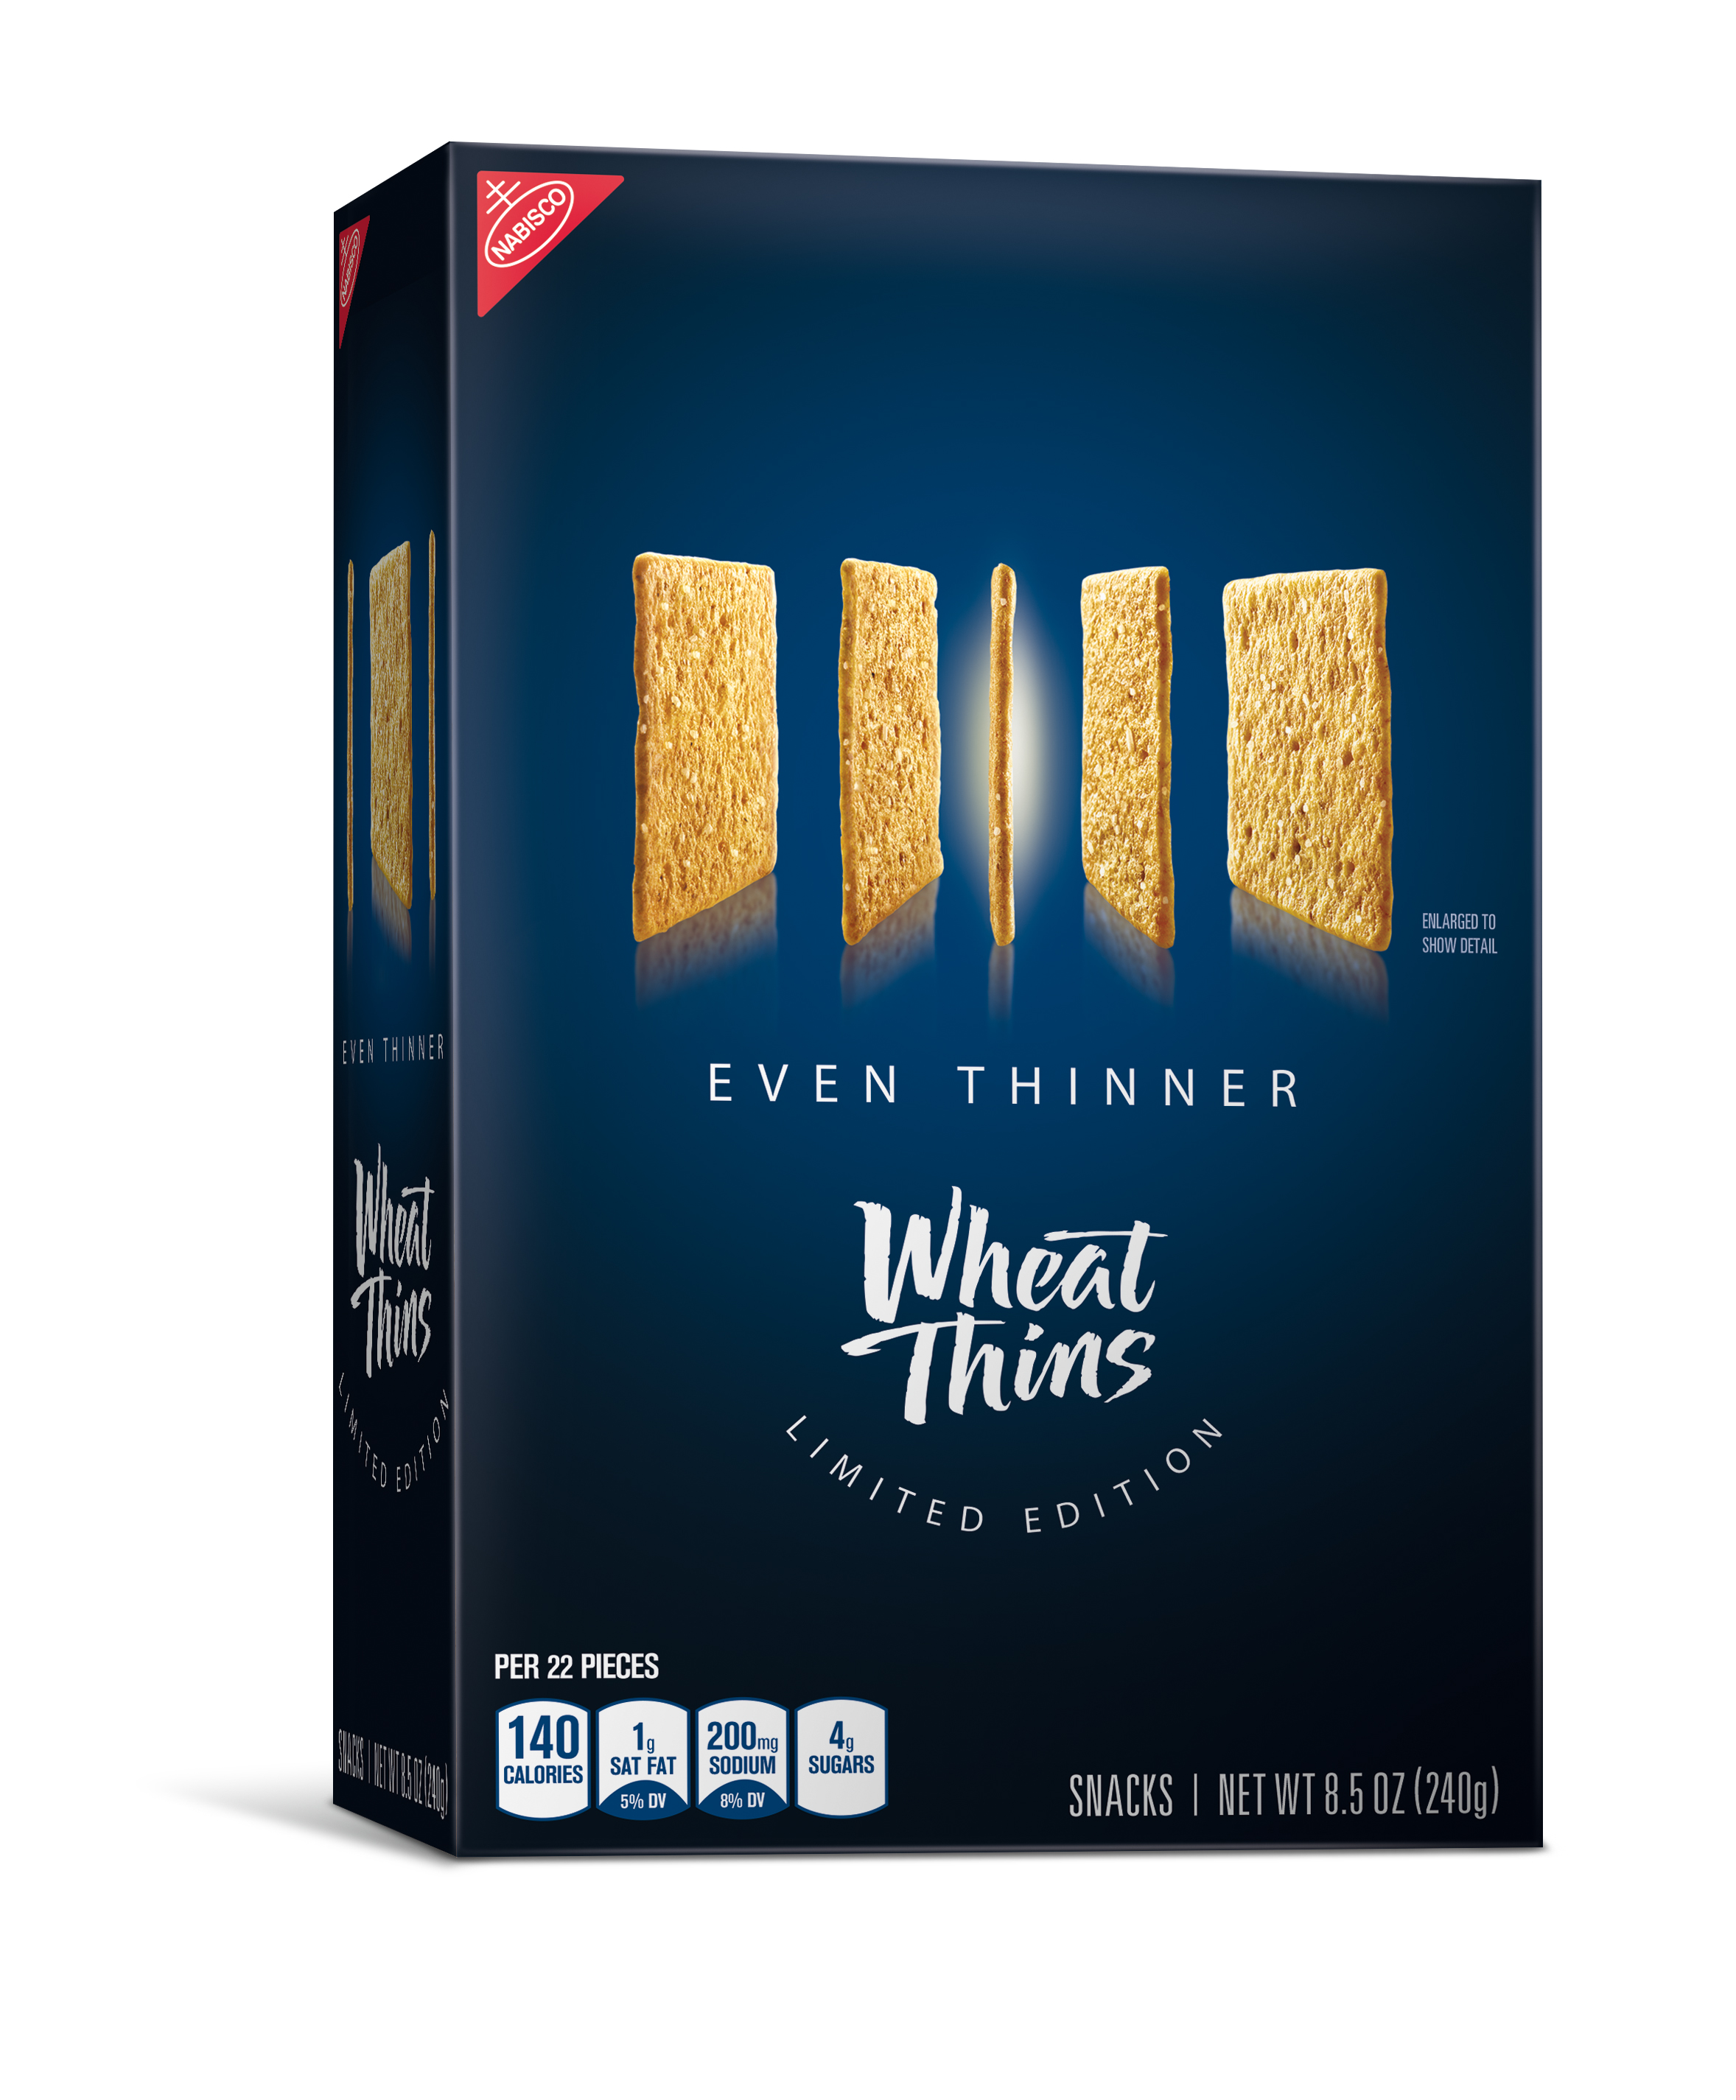 Wheat Thins Gets A Skinnier Look